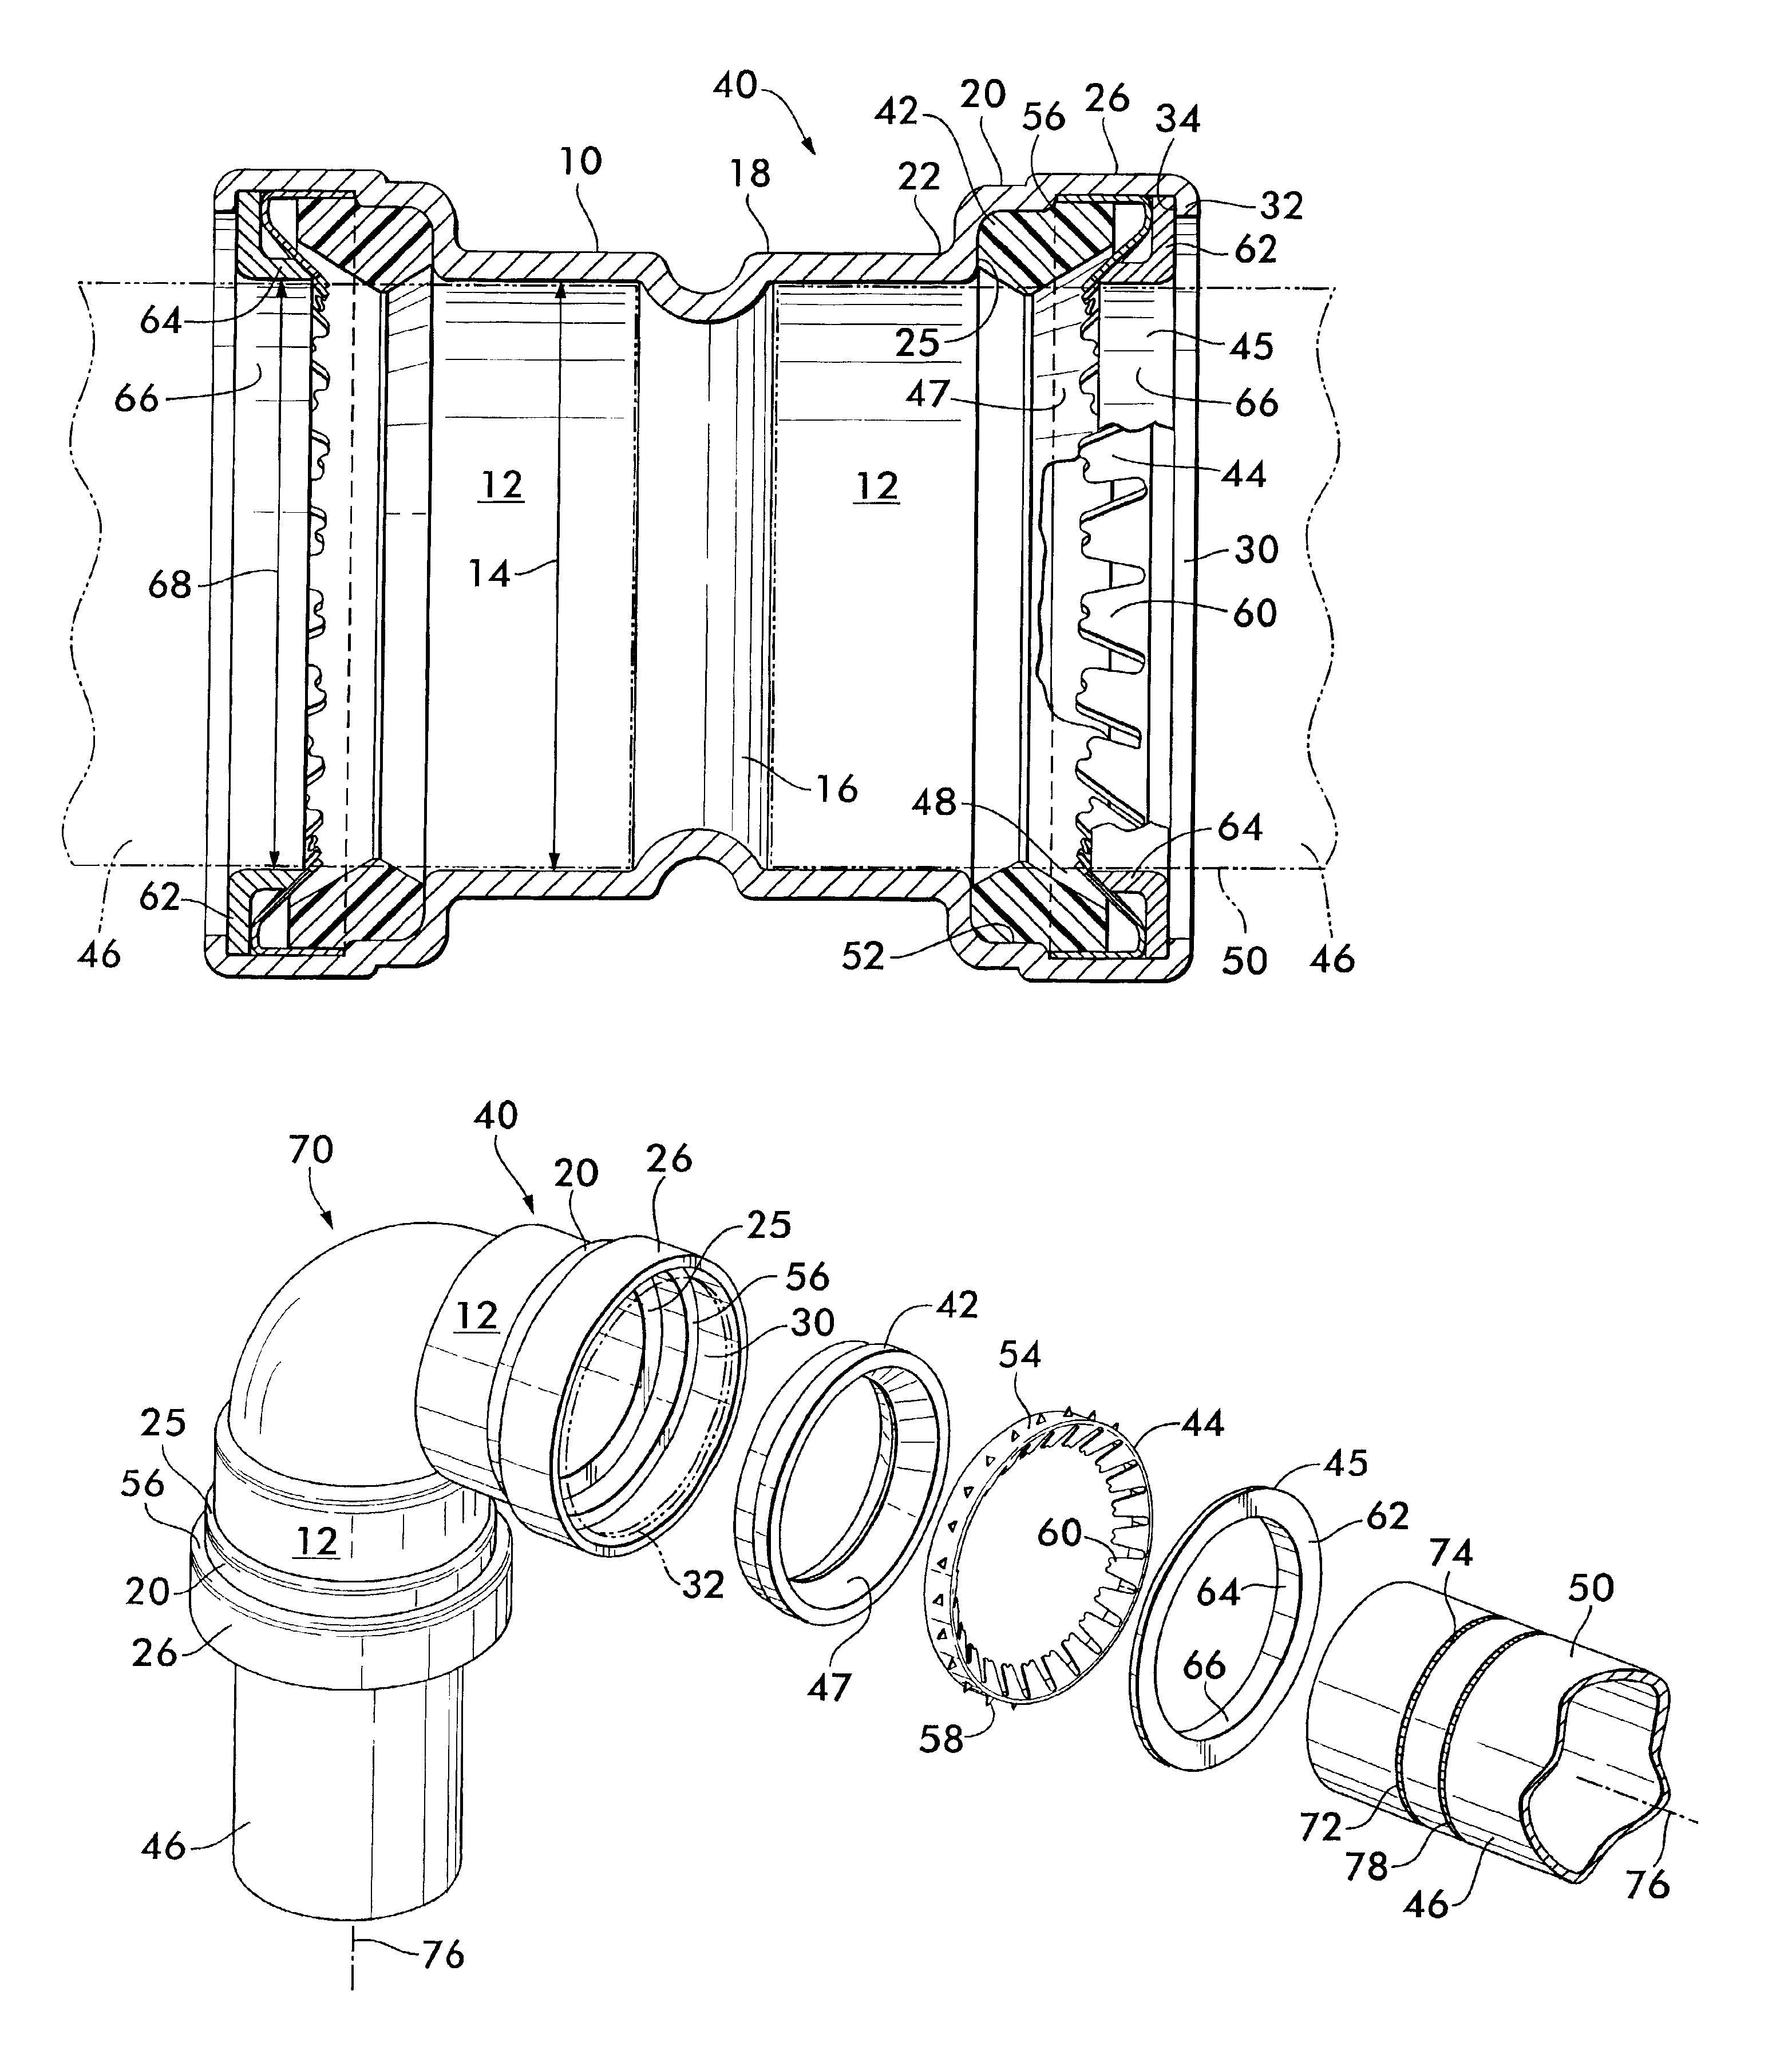 Mechanical pipe coupling derived from a standard fitting